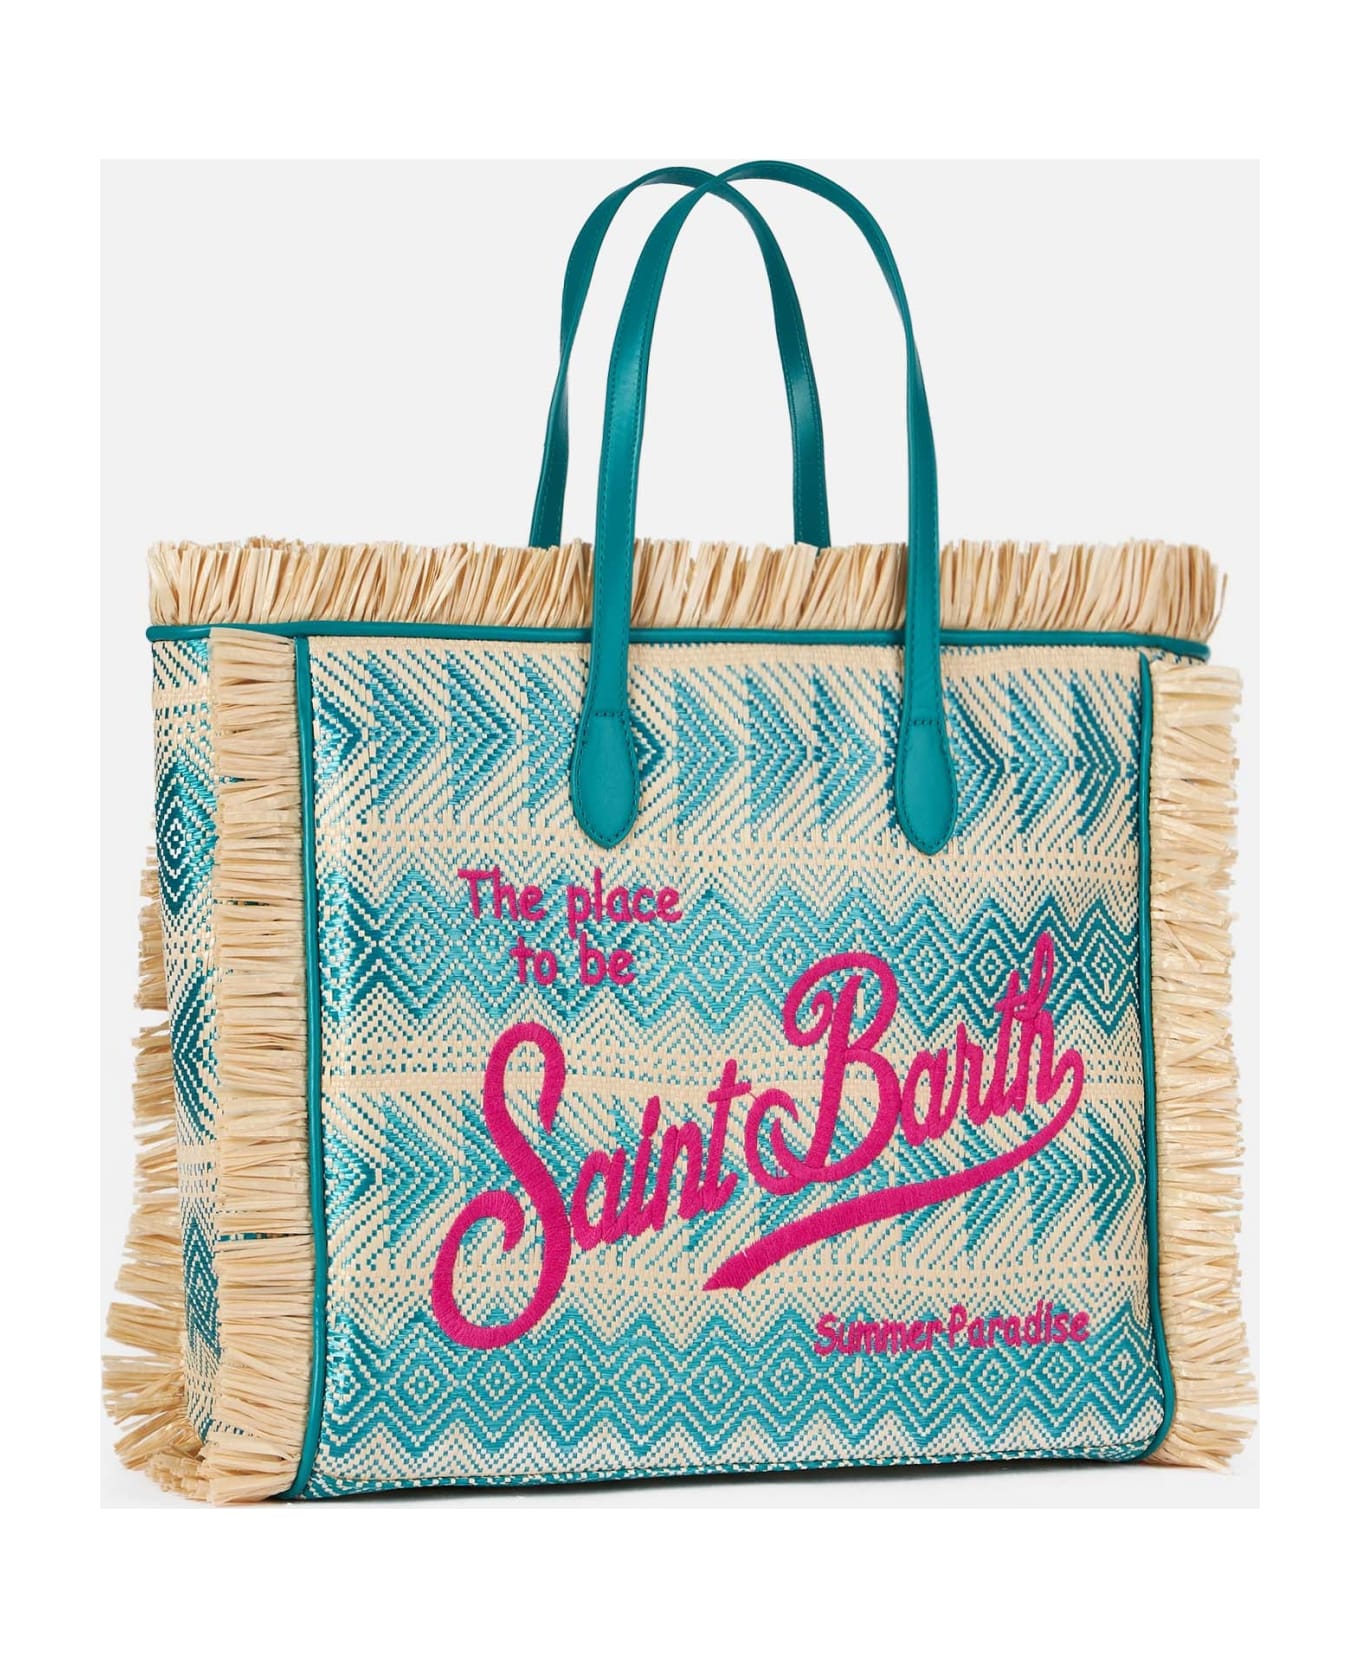 MC2 Saint Barth Vanity Straw Bag With Embroidery And Geometric Pattern - SKY トートバッグ